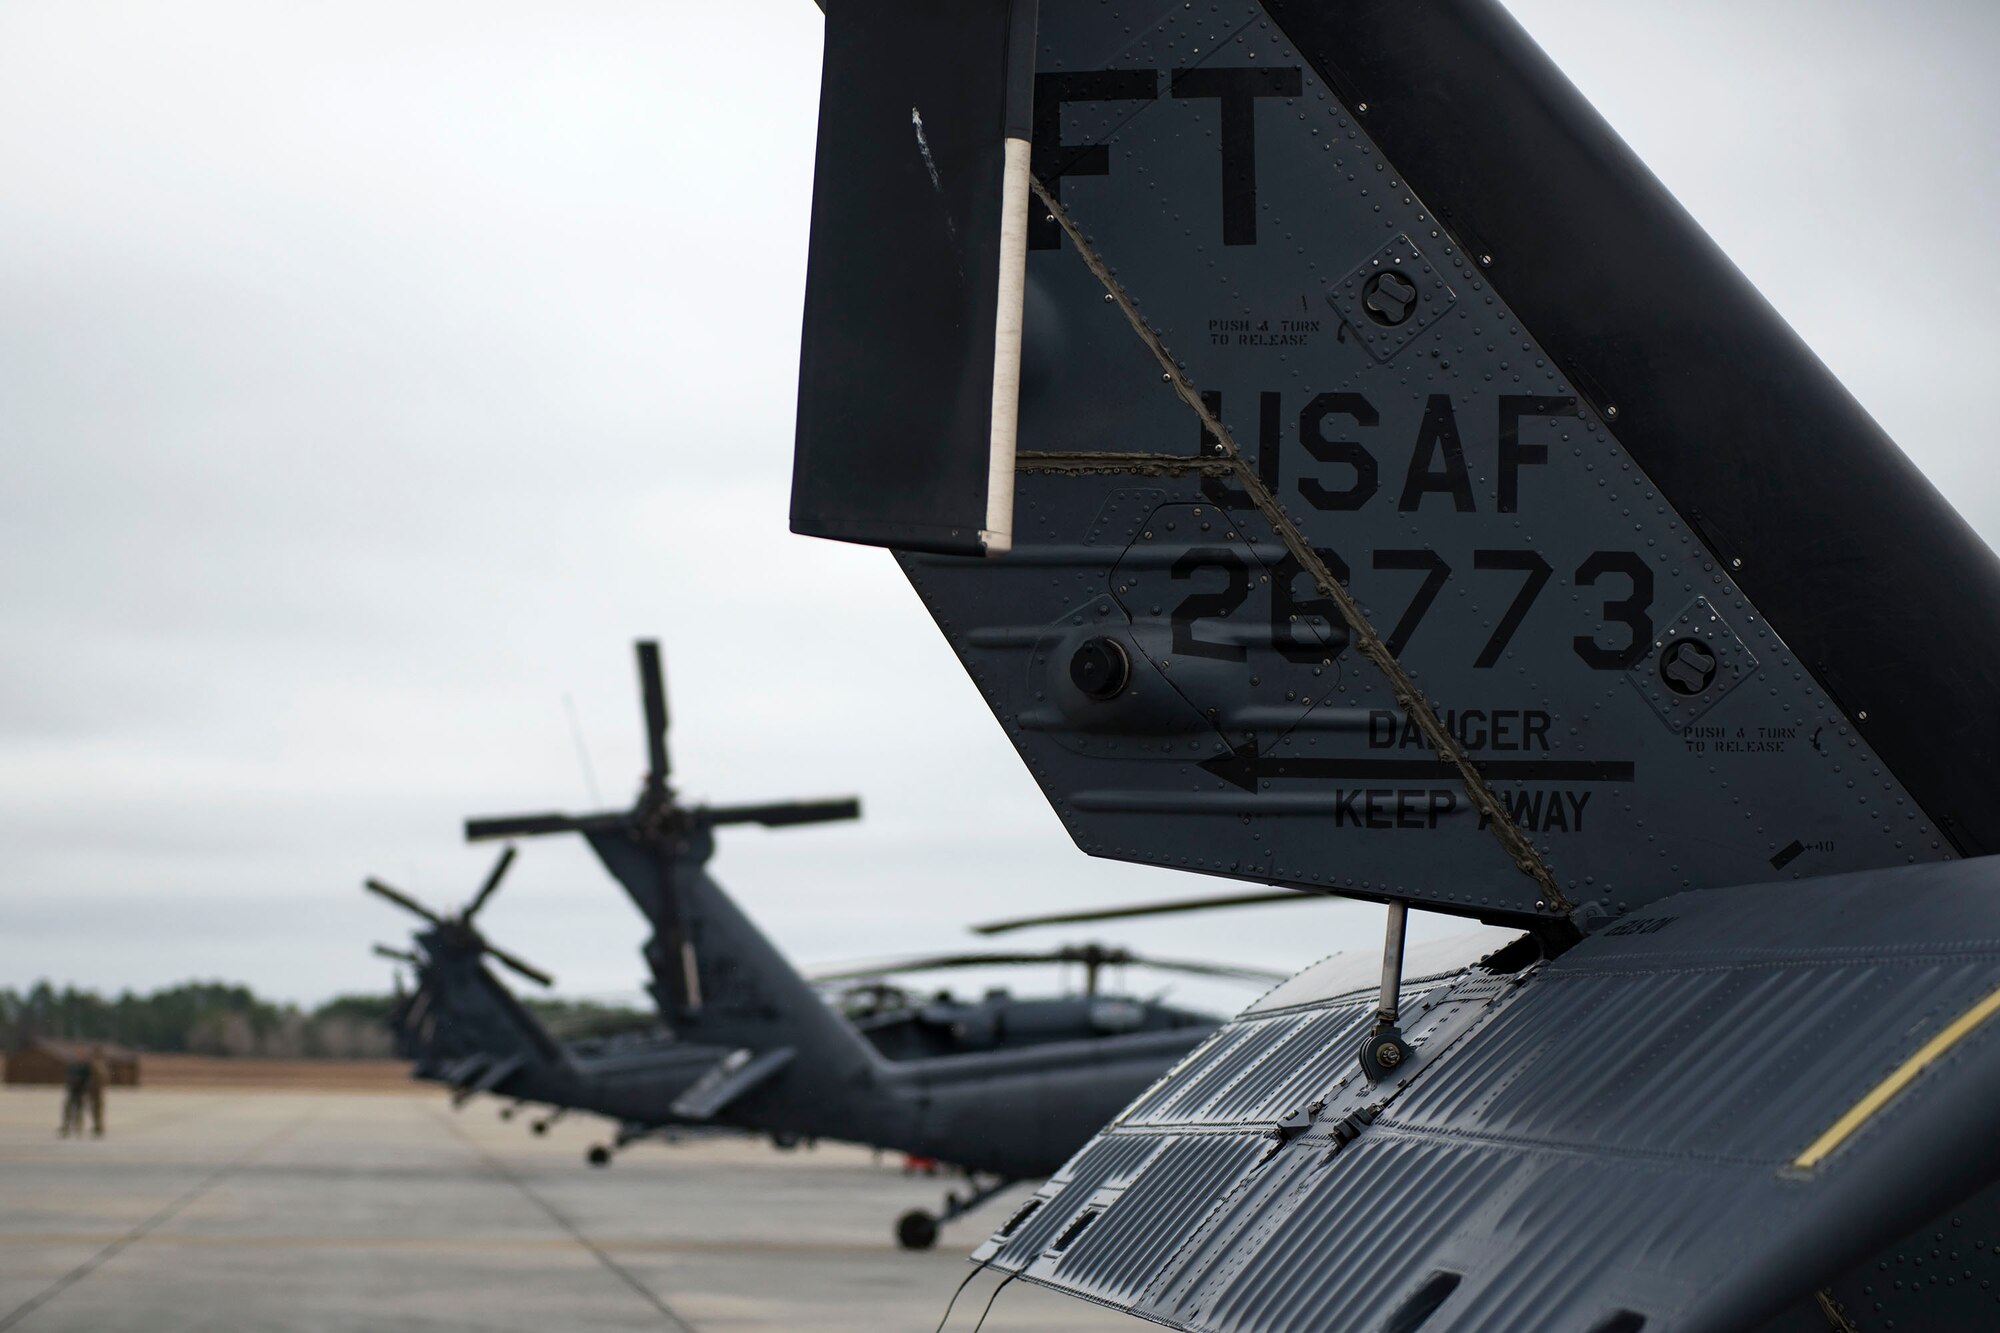 HH-60G Pave Hawks rest on the flight line, Jan. 9, 2018, at Moody Air Force Base, Ga. The 41st Helicopter Maintenance Unit keeps Pave Hawks operationally mission-ready by performing inspections and repairs on various components of the helicopter. Those efforts are critical in facilitating the mission of the 41st Rescue Squadron at Moody. (U.S. Air Force photo by Airman 1st Class Erick Requadt)